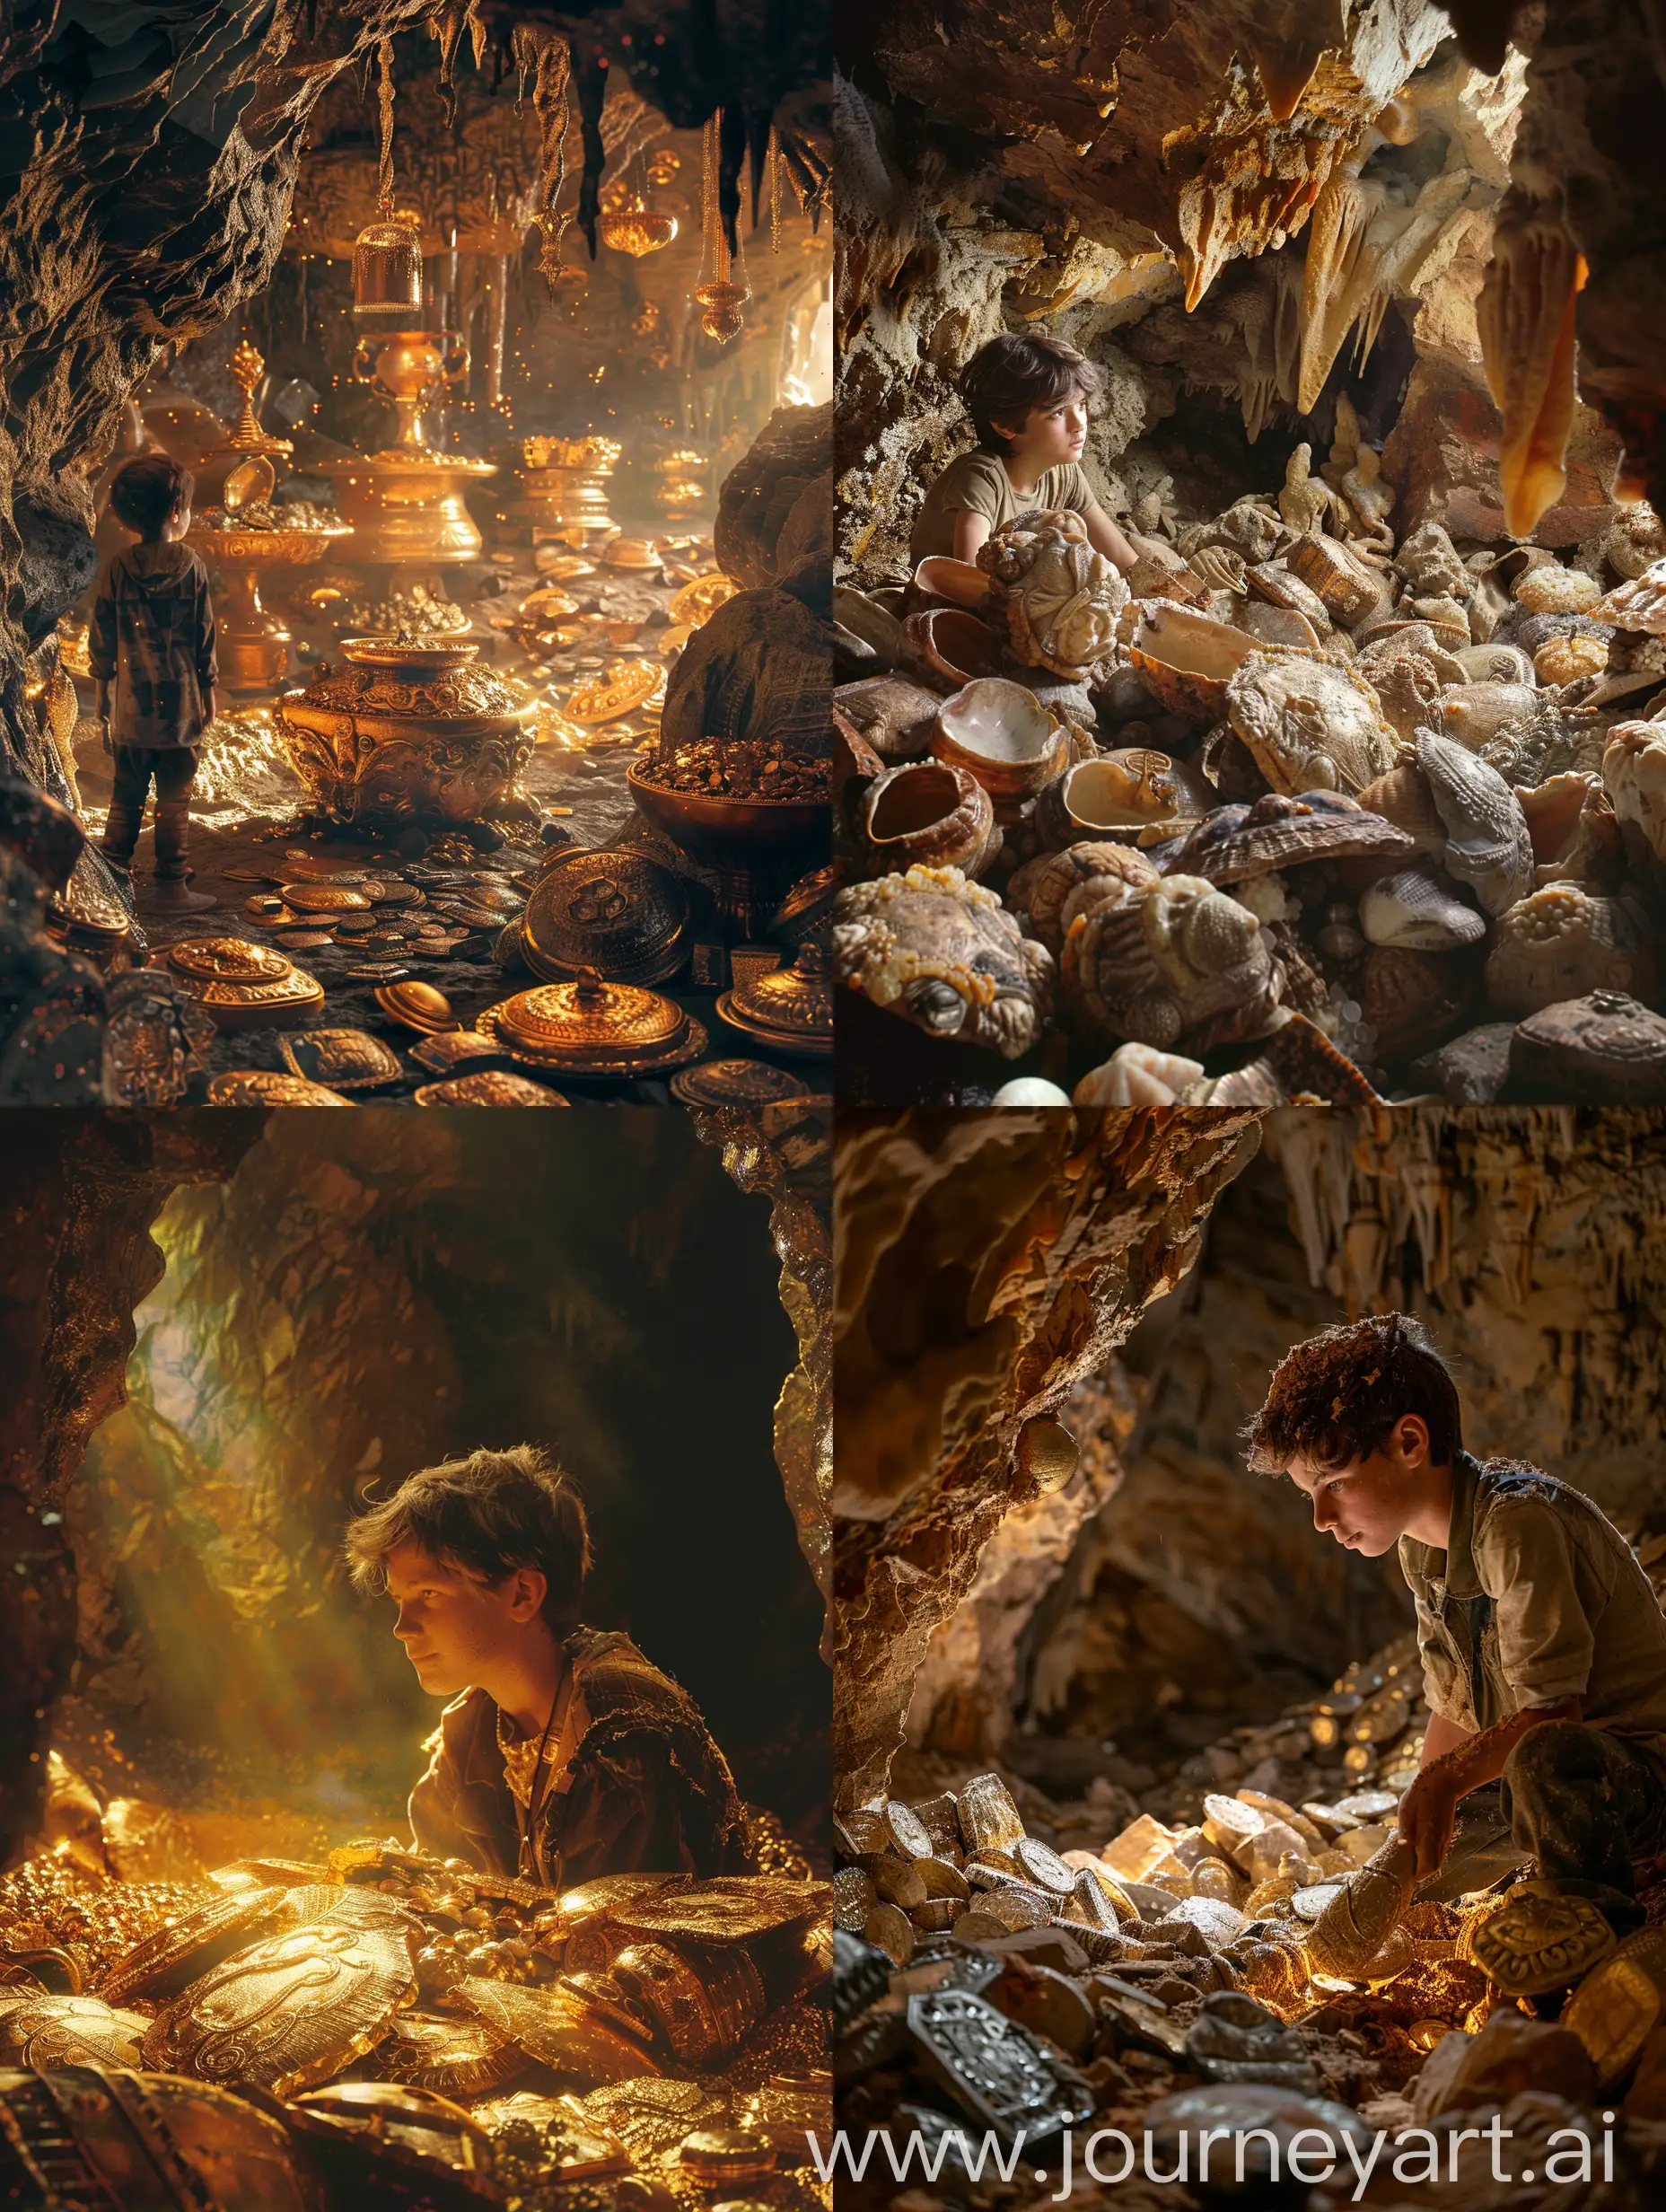 Young-Adventurer-Surrounded-by-Vast-Treasure-in-a-Warm-Cave